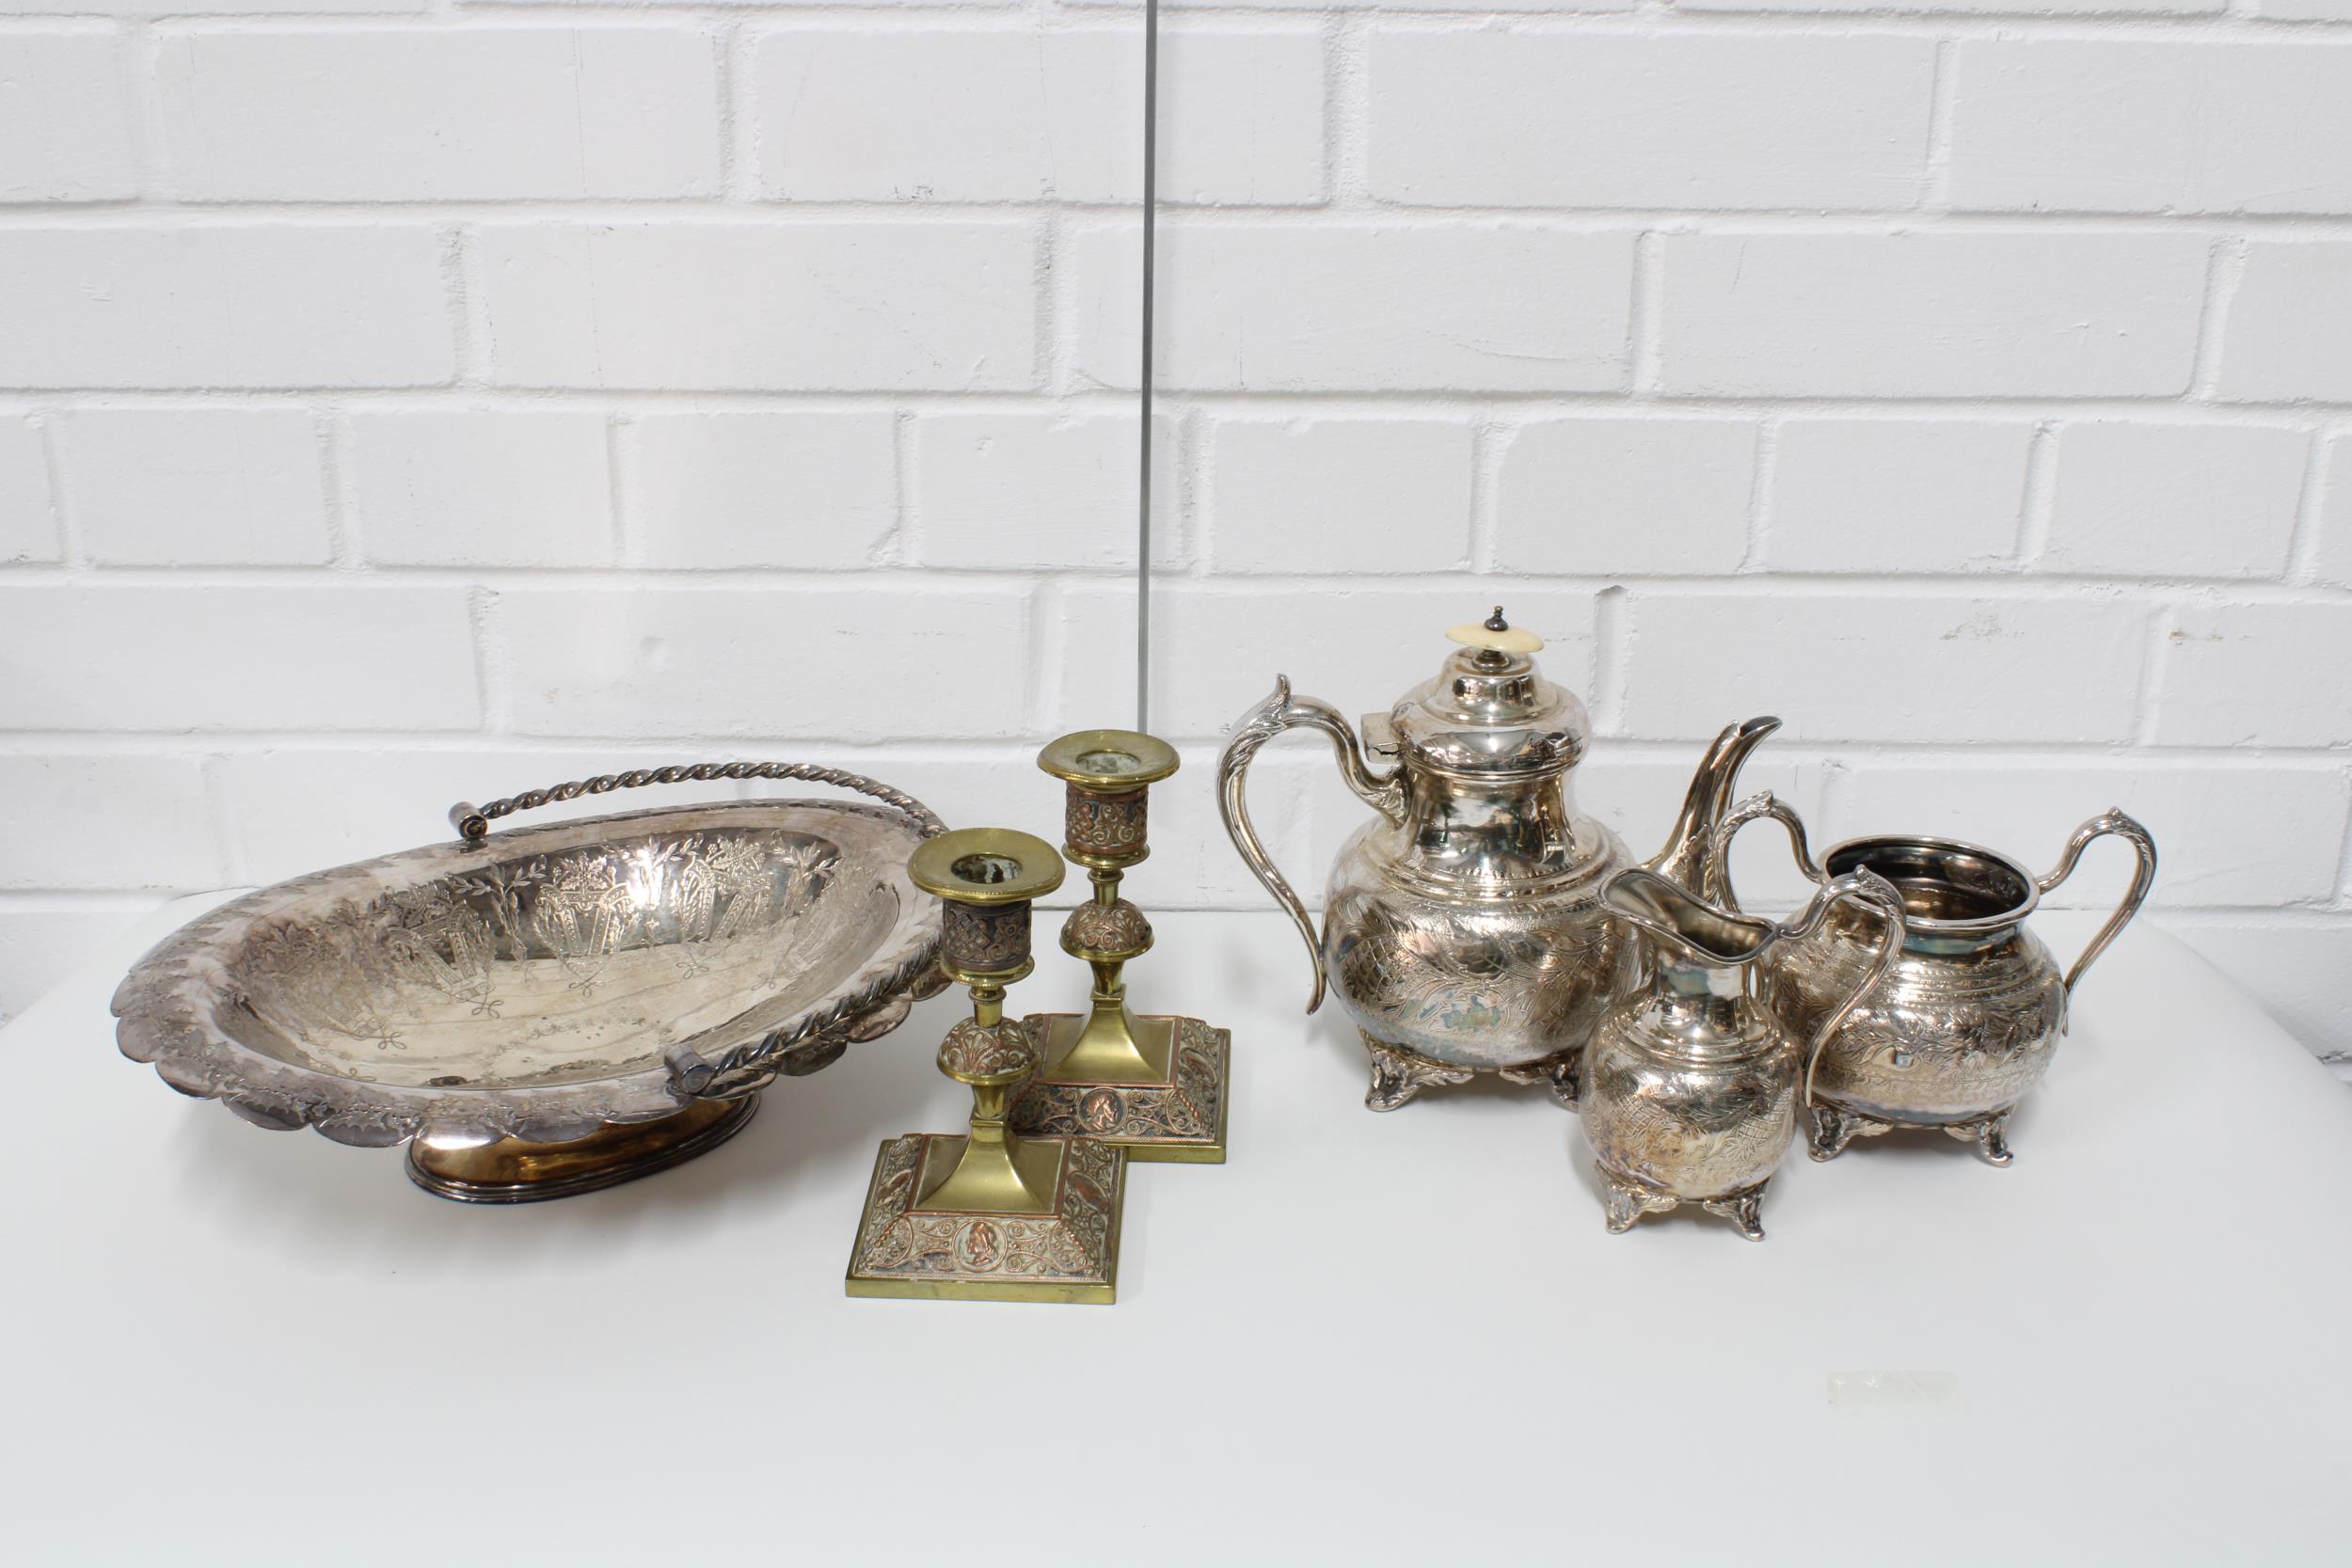 Silver plated tea set and dish, together with a pair of brass and copper candlesticks (6)